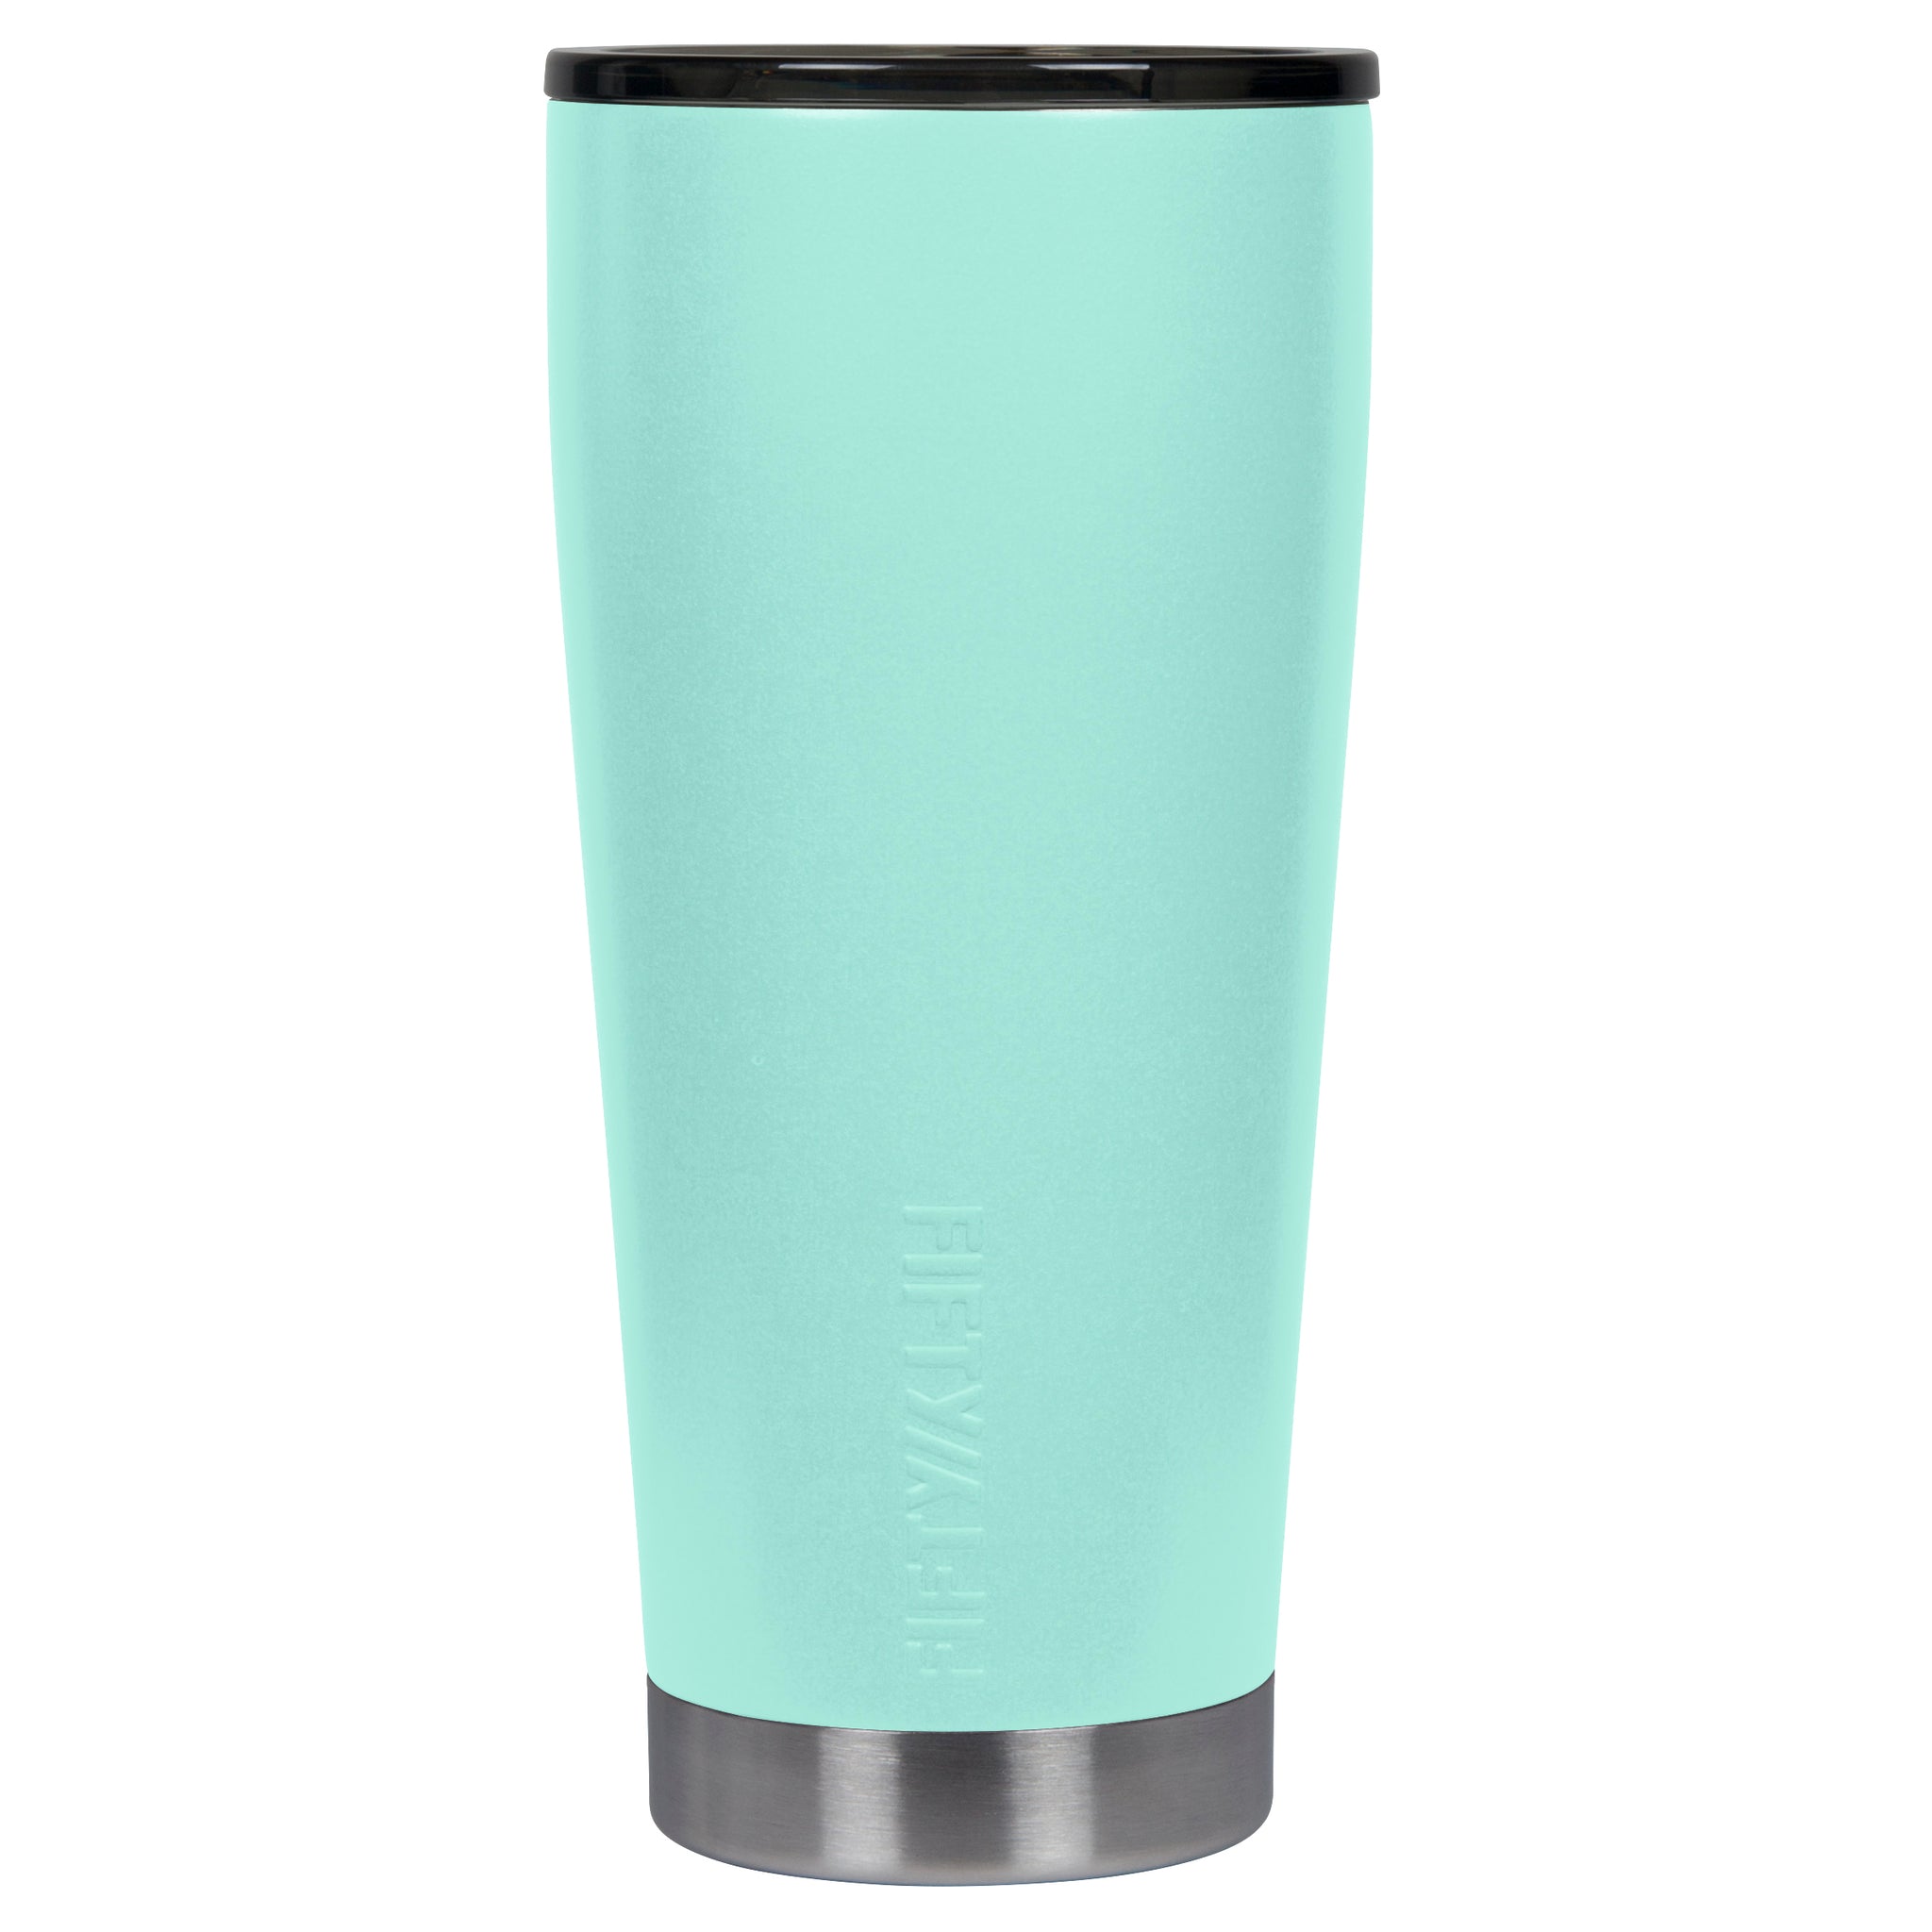 20oz Double Wall Acrylic Tapered Tumbler With Straw And Dome Lid BPA F –  The Blinging Bluebird